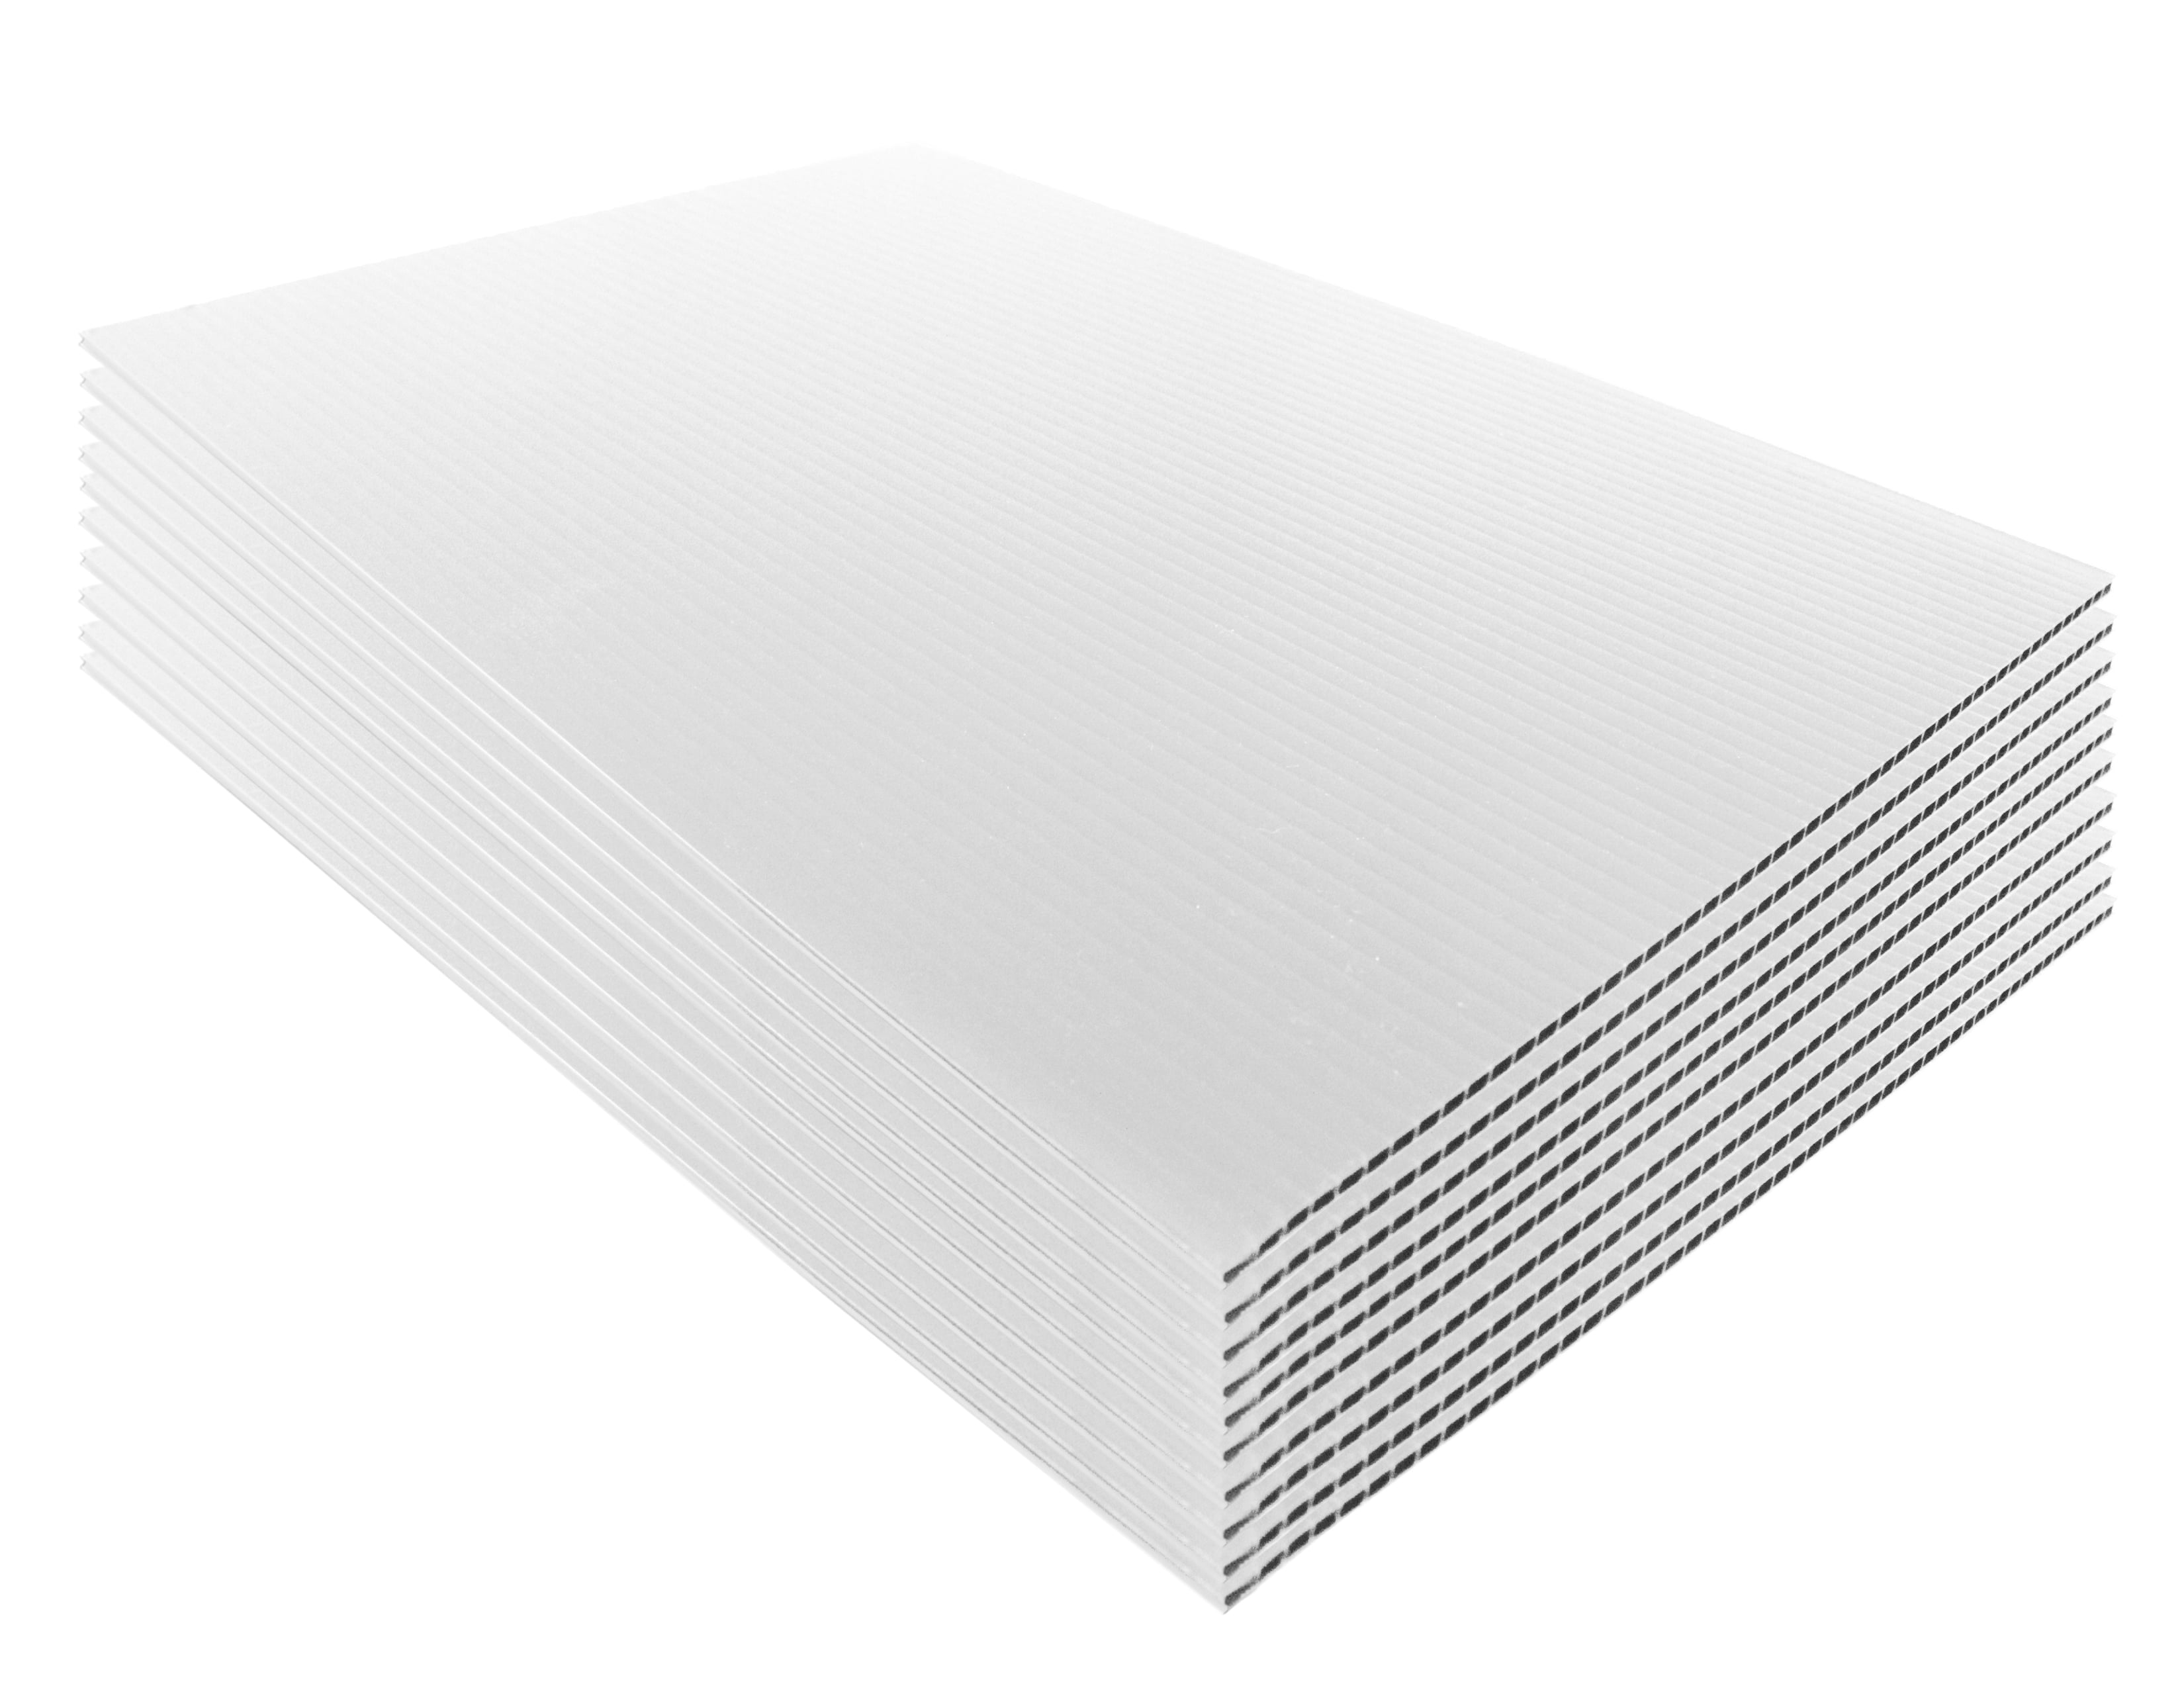 24x36 4mm Corrugated Plastic Sheets 25 Pack White Waterproof Lightweight,  Blank Boards Double Sided for Lawn Signs, Garage Sales and Real State.